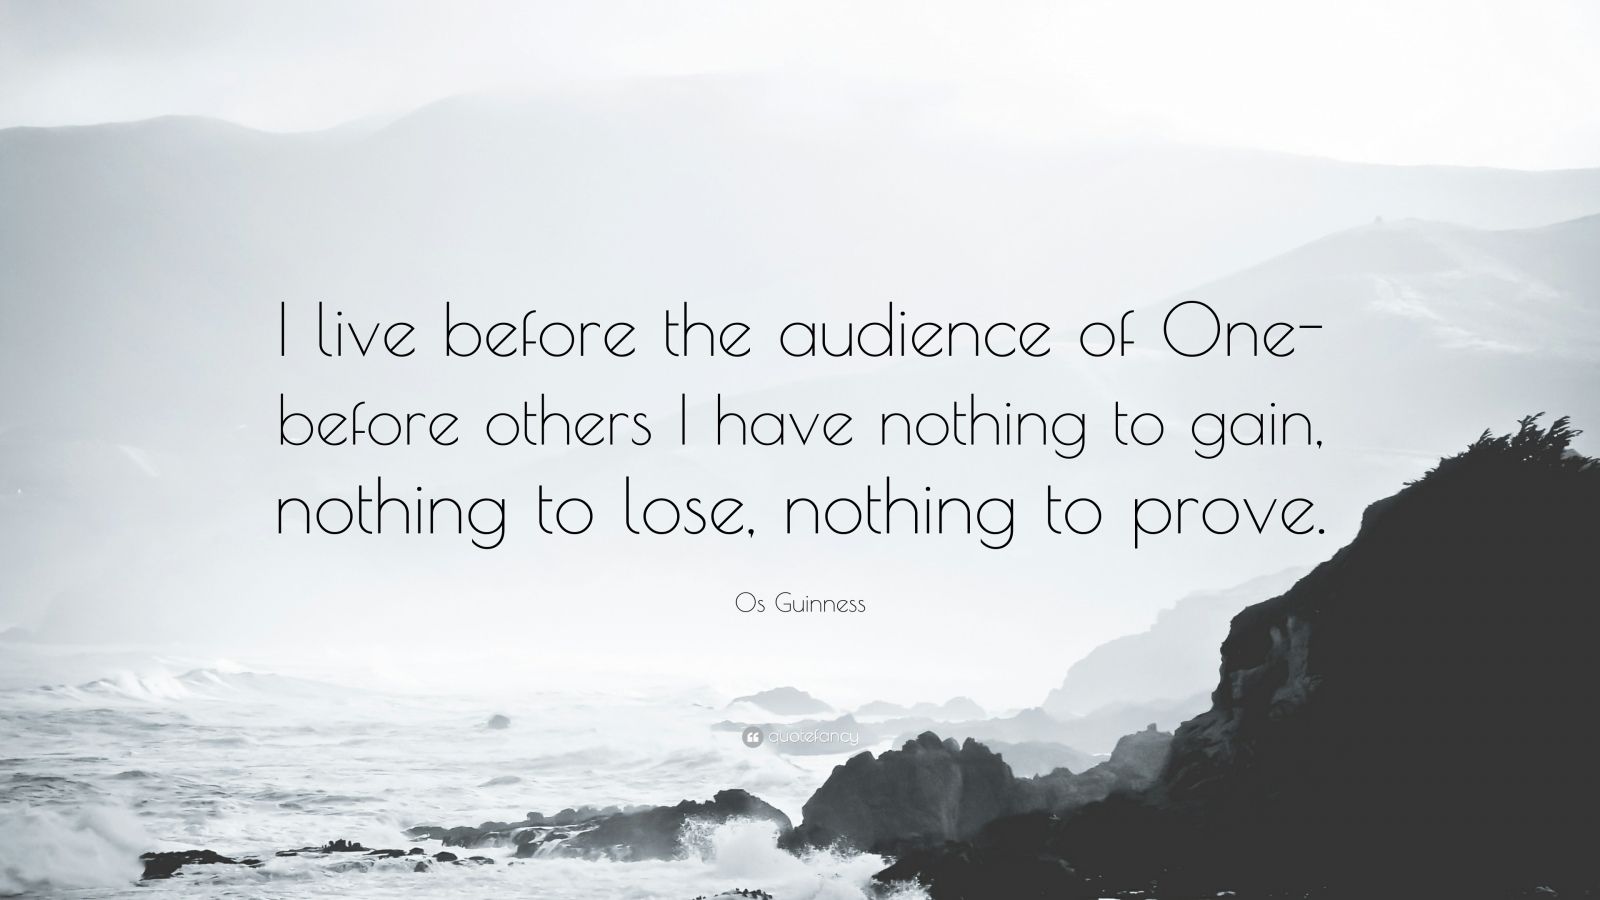 Os Guinness Quote: “I live before the audience of One-before others I